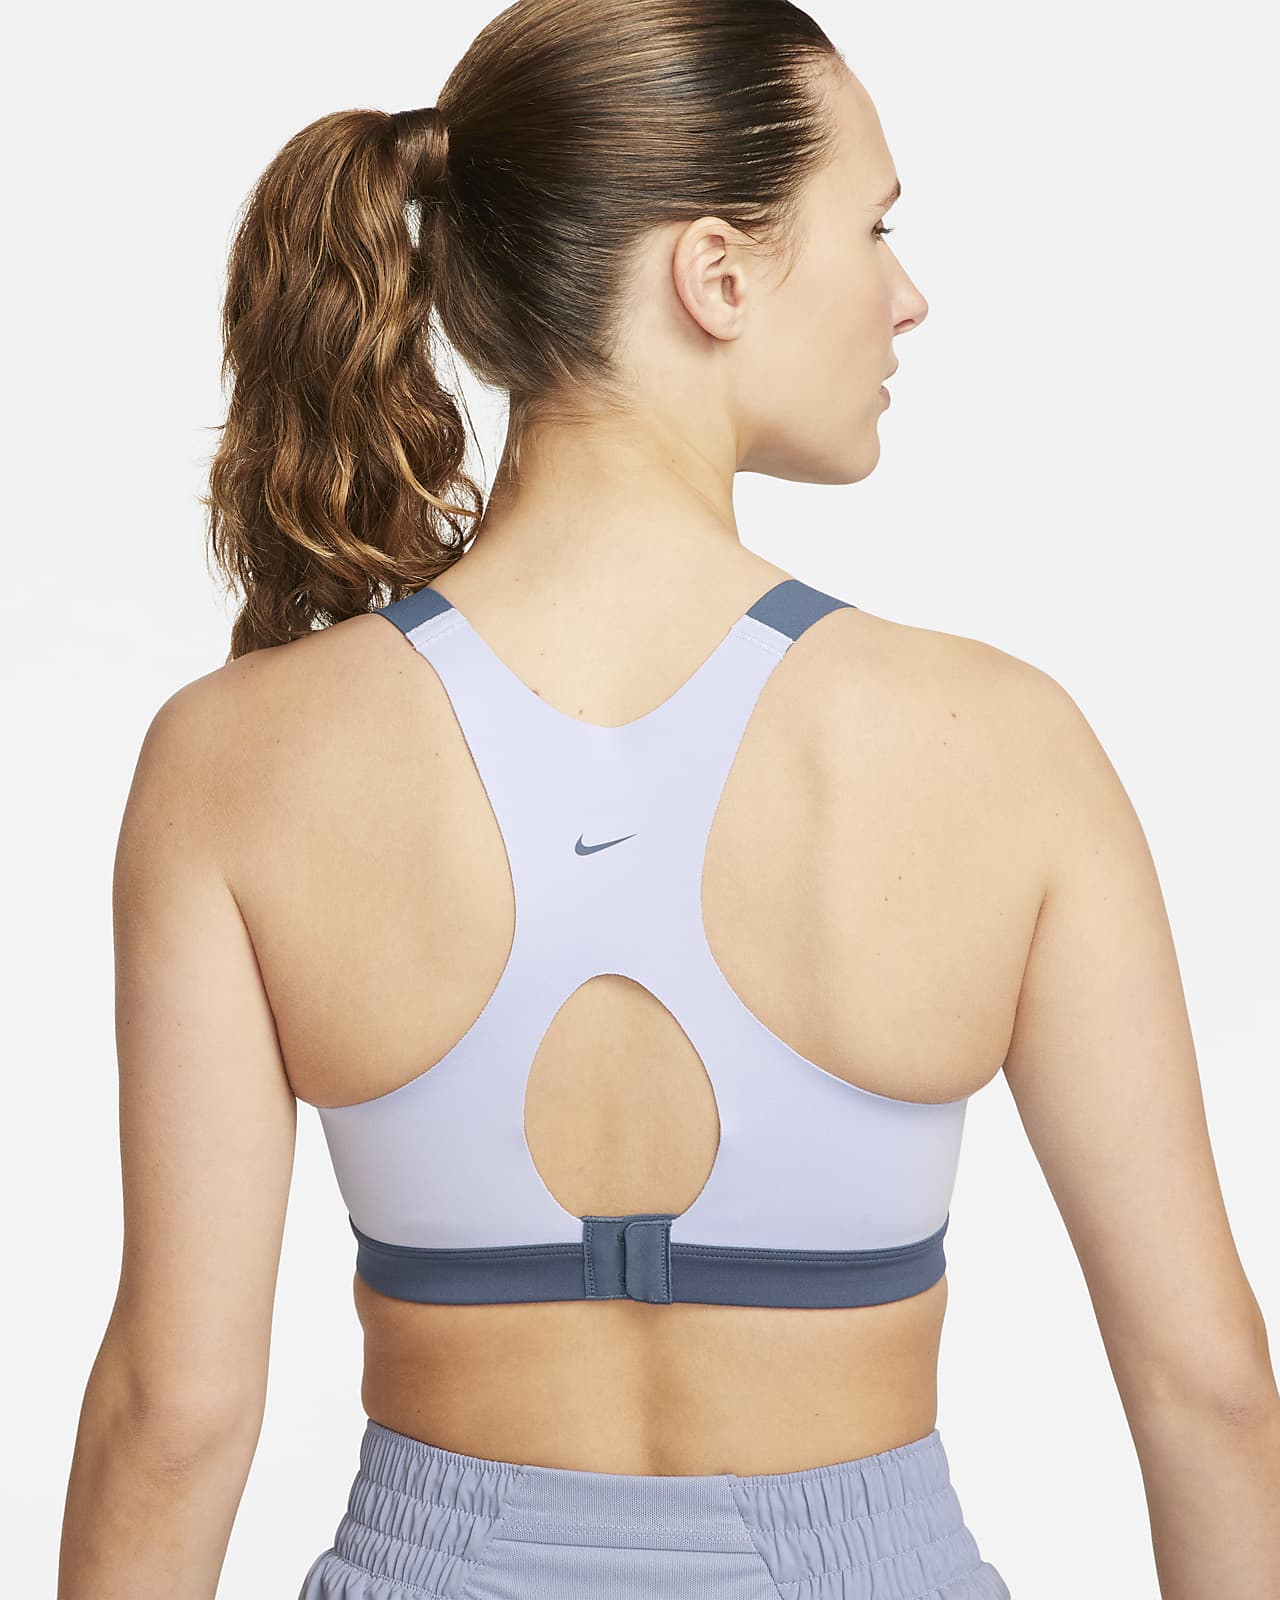 Nike Alpha Women's High-Support Padded Zip-Front Sports Bra. ID